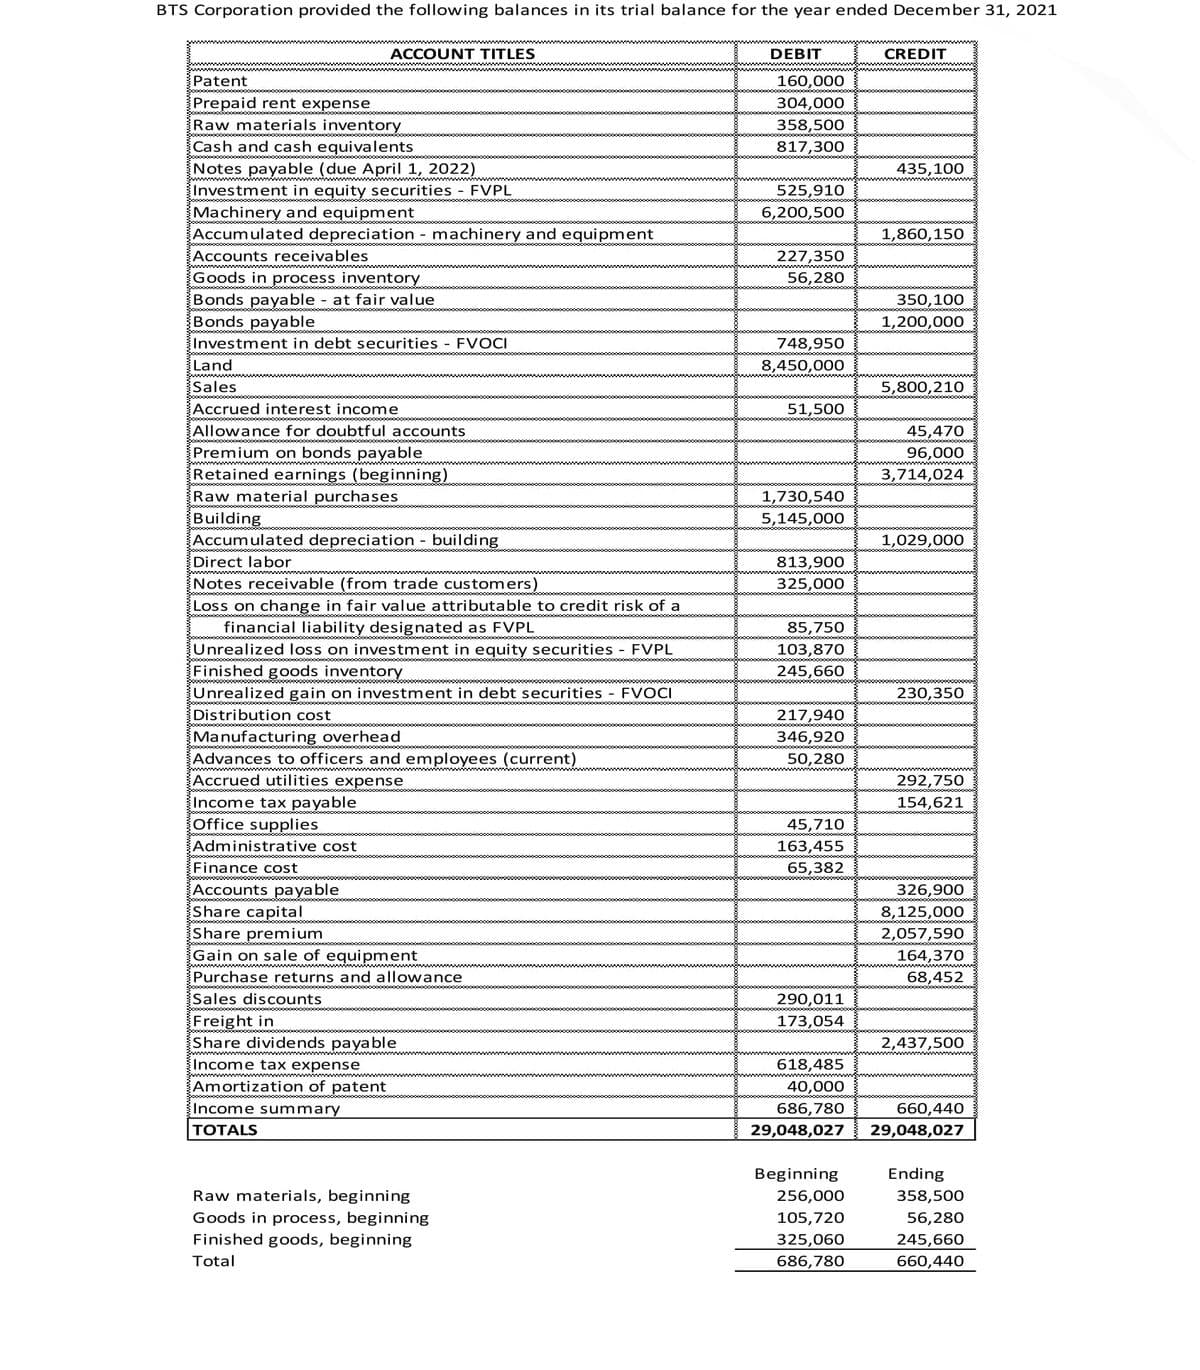 BTS Corporation provided the following balances in its trial balance for the year ended December 31, 2021
ACCOUNT TITLES
DEBIT
CREDIT
Patent
160,000
Prepaid rent expense
Raw materials inventory
Cash and cash equivalents
Notes payable (due April 1, 2022)
Investment in equity securities FVPL
Machinery and equipment
Accumulated depreciation - machinery and equipment
Accounts receivables
Goods in process inventory
Bonds payable - at fair value
Bonds payable
Investment in debt securities - FVOCI
304,000
358,500
817,300
435,100
525,910
6,200,500
1,860,150
227,350
56,280
350,100
1,200,000
748,950
Land
8,450,000
Sales
5,800,210
Accrued interest income
51,500
Allowance for doubtful accounts
45,470
Premium on bonds payable
Retained earnings (beginning)
Raw material purchases
Building
Accumulated depreciation - building
Direct labor
Notes receivable (from trade customers)
Loss on change in fair value attributable to credit risk of a
financial liability designated as FVPL
Unrealized loss on investment in equity securities - FVPL
Finished goods inventory
96,000
ww w ww wwwww
3,714,024
1,730,540
5,145,000
1,029,000
813,900
wwwww
325,000
85,750
103,870
245,660
Unrealized gain on investment in debt securities - FVOCI
Distribution cost
230,350
217,940
Manufacturing overhead
Advances to officers and employees (current)
Accrued utilities expense
Income tax payable
Office supplies
Administrative cost
346,920
50,280
292,750
154,621
45,710
163,455
Finance cost
65,382
Accounts payable
Share capital
Share premium
Gain on sale of equipment
Purchase returns and allowance
Sales discounts
326,900
8,125,000
2,057,590
164,370
68,452
290,011
173,054
Freight in
Share dividends payable
2,437,500
Income tax expense
618,485
www
Amortization of patent
40,000
Income summary
686,780
29,048,027
660,440
29,048,027
ТОTALS
Beginning
Ending
Raw materials, beginning
256,000
358,500
Goods in process, beginning
Finished goods, beginning
105,720
56,280
325,060
686,780
245,660
Total
660,440
